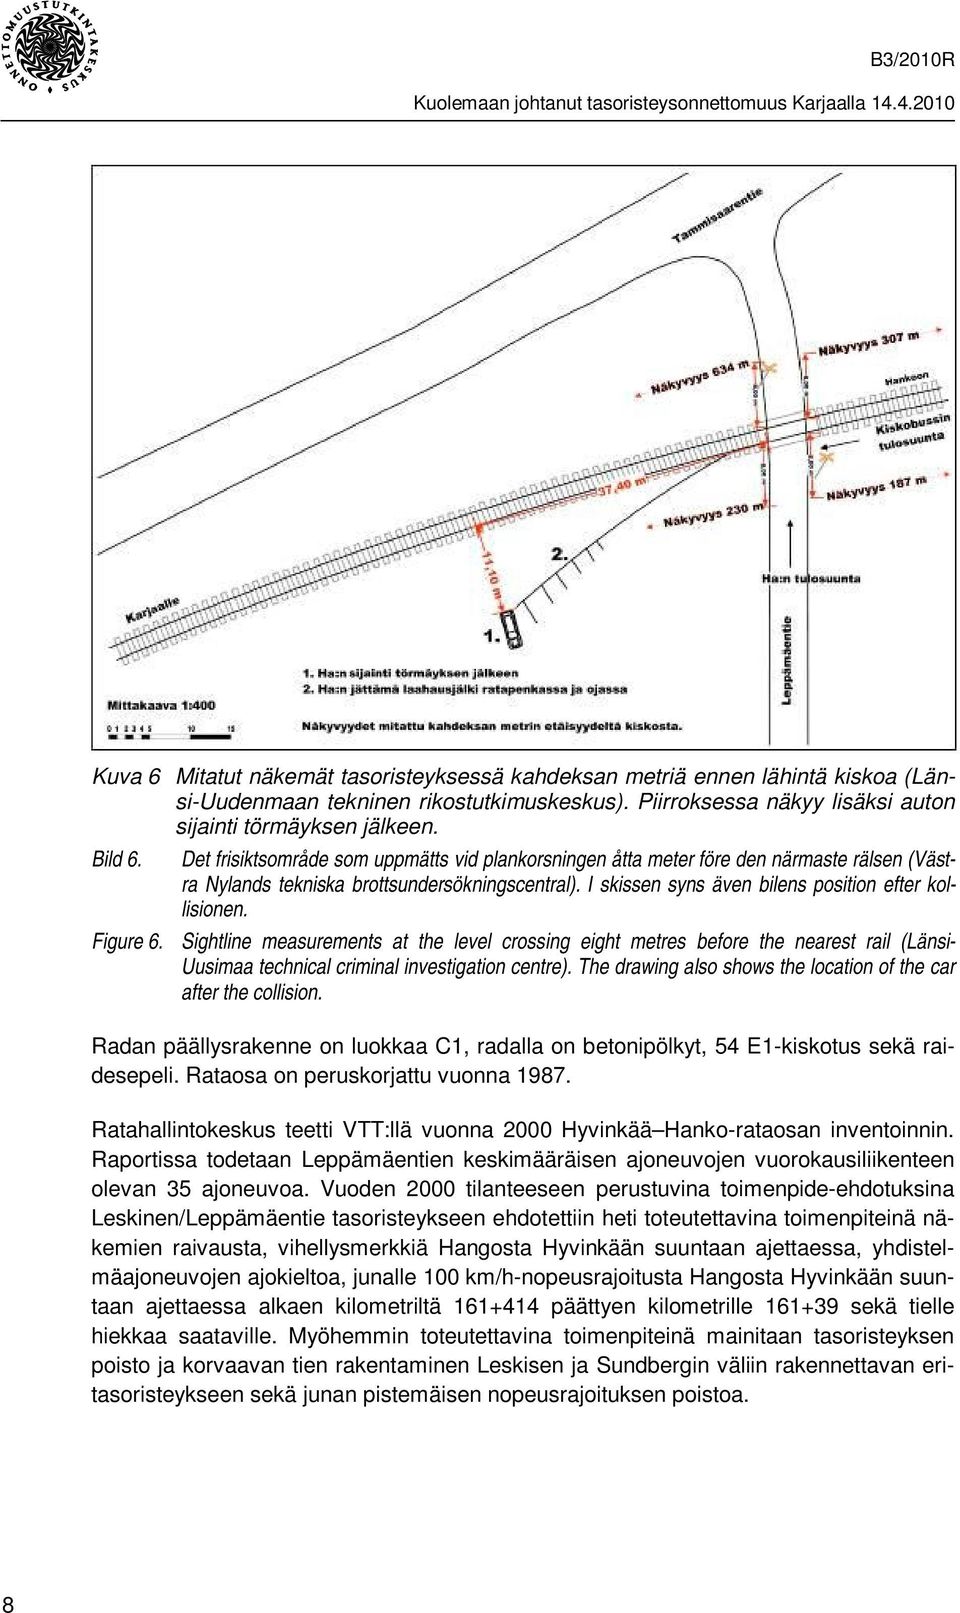 Figure 6. Sightline measurements at the level crossing eight metres before the nearest rail (Länsi- Uusimaa technical criminal investigation centre).